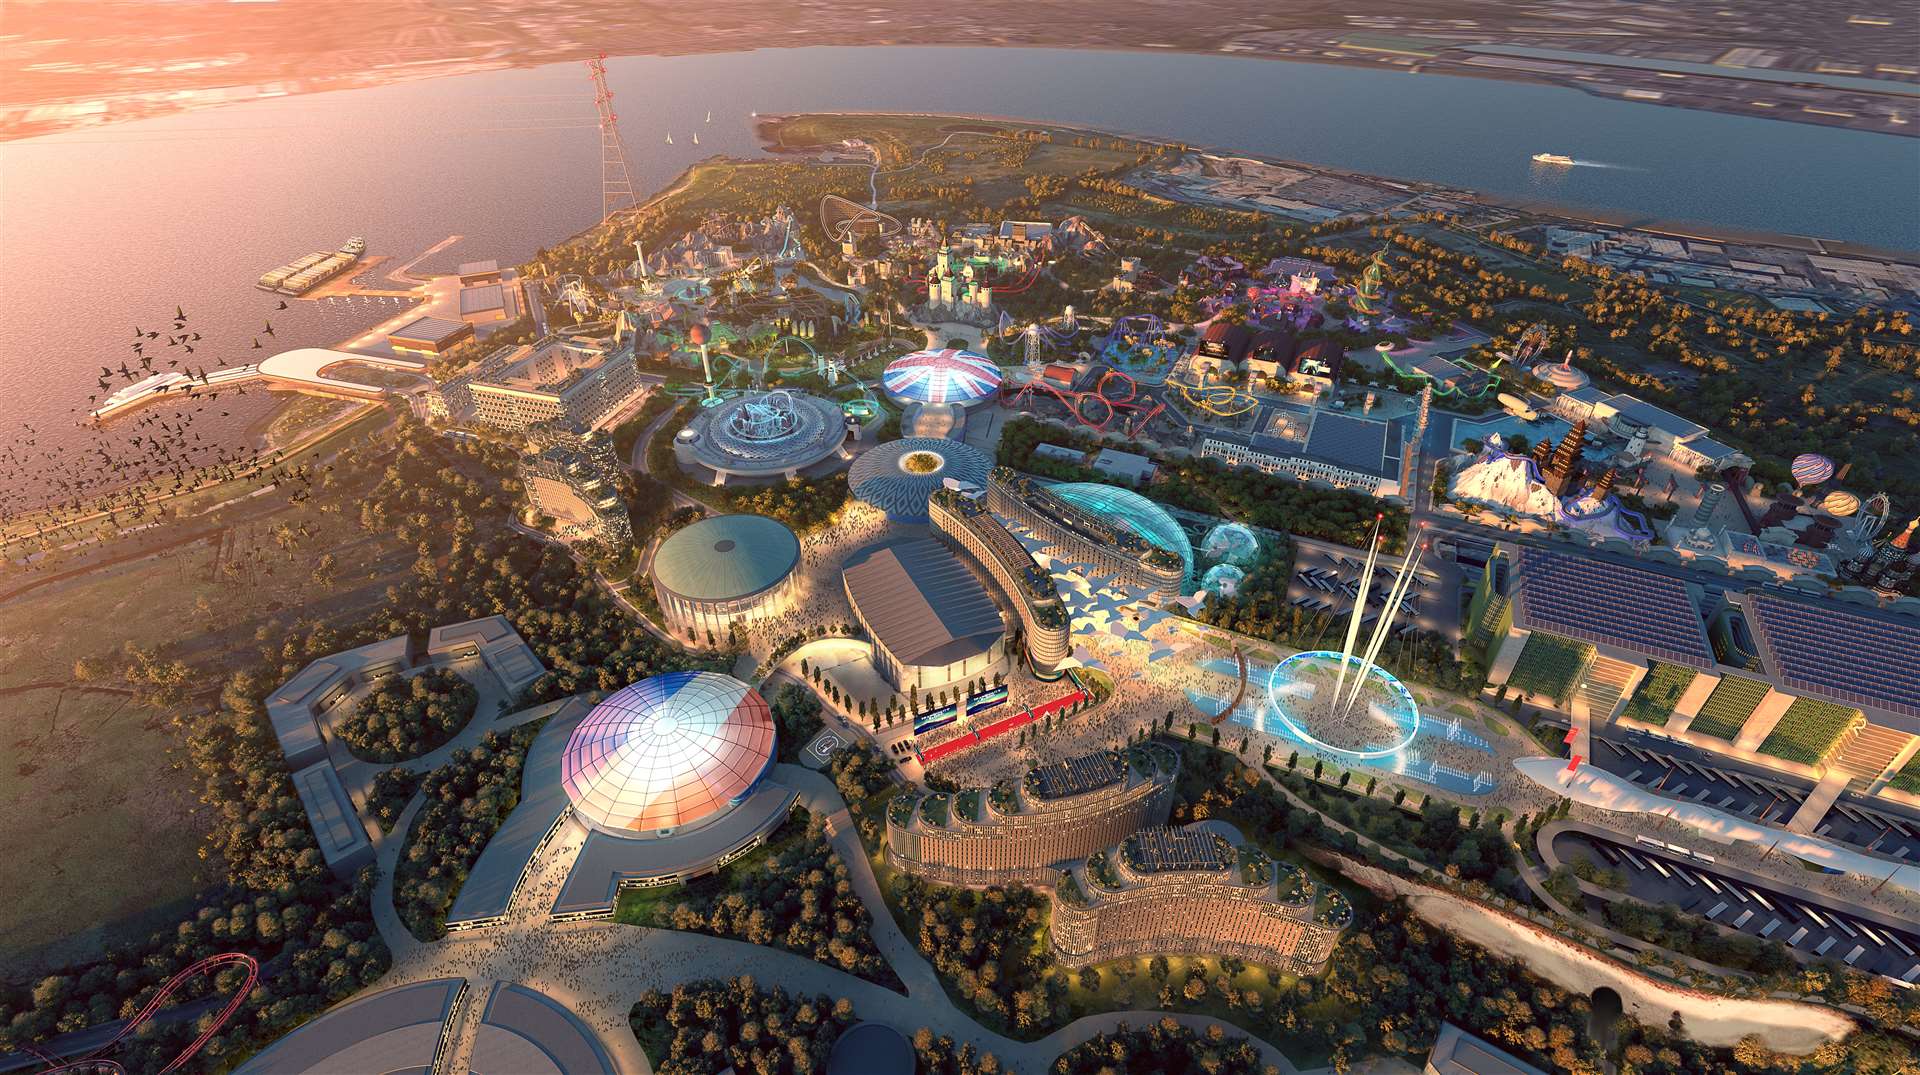 A detailed impression of what the London Resort theme park will look like